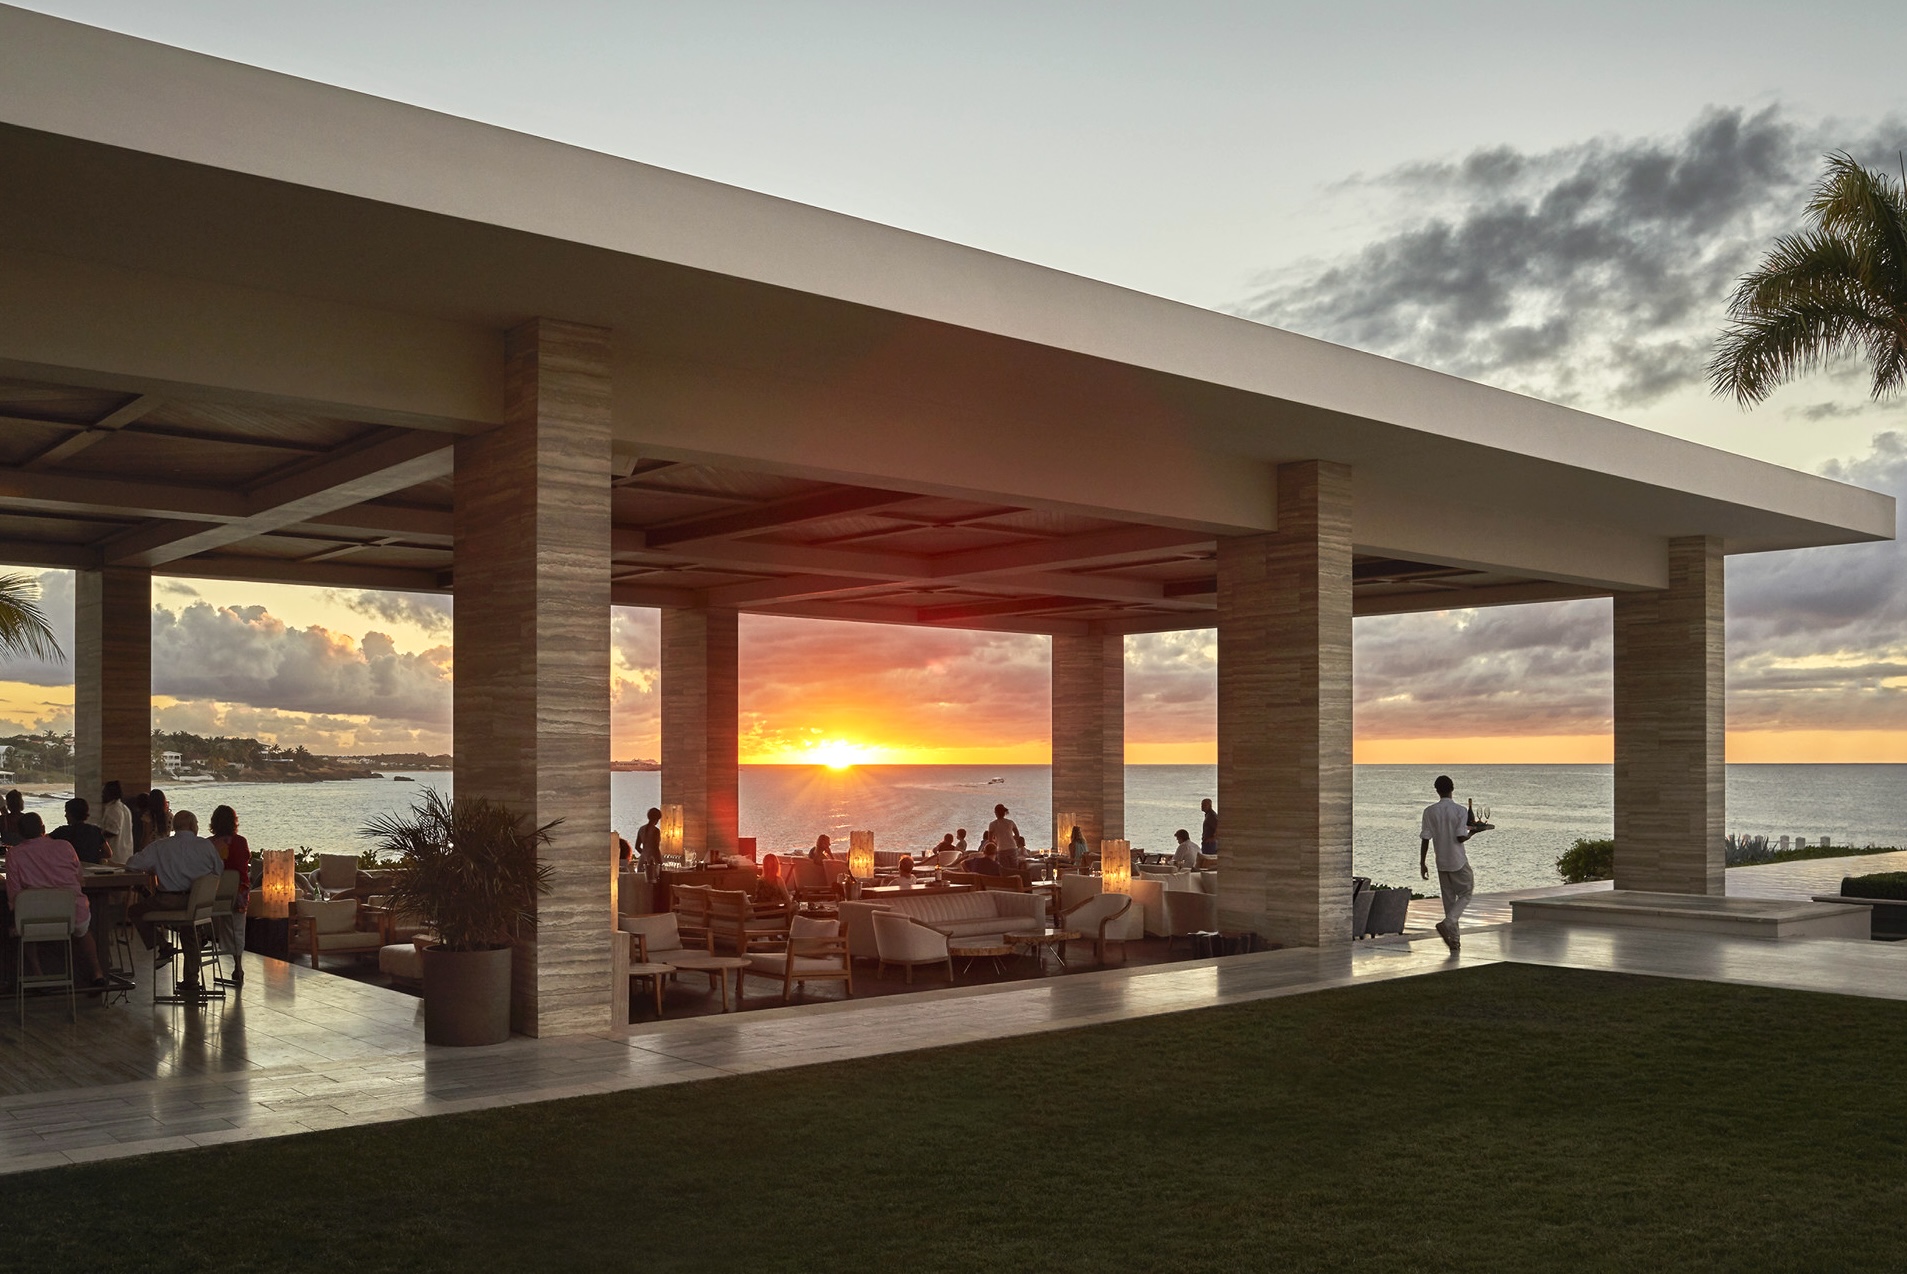 Why The Four Seasons Anguilla Is Among The Caribbean’s Best Beach Resorts